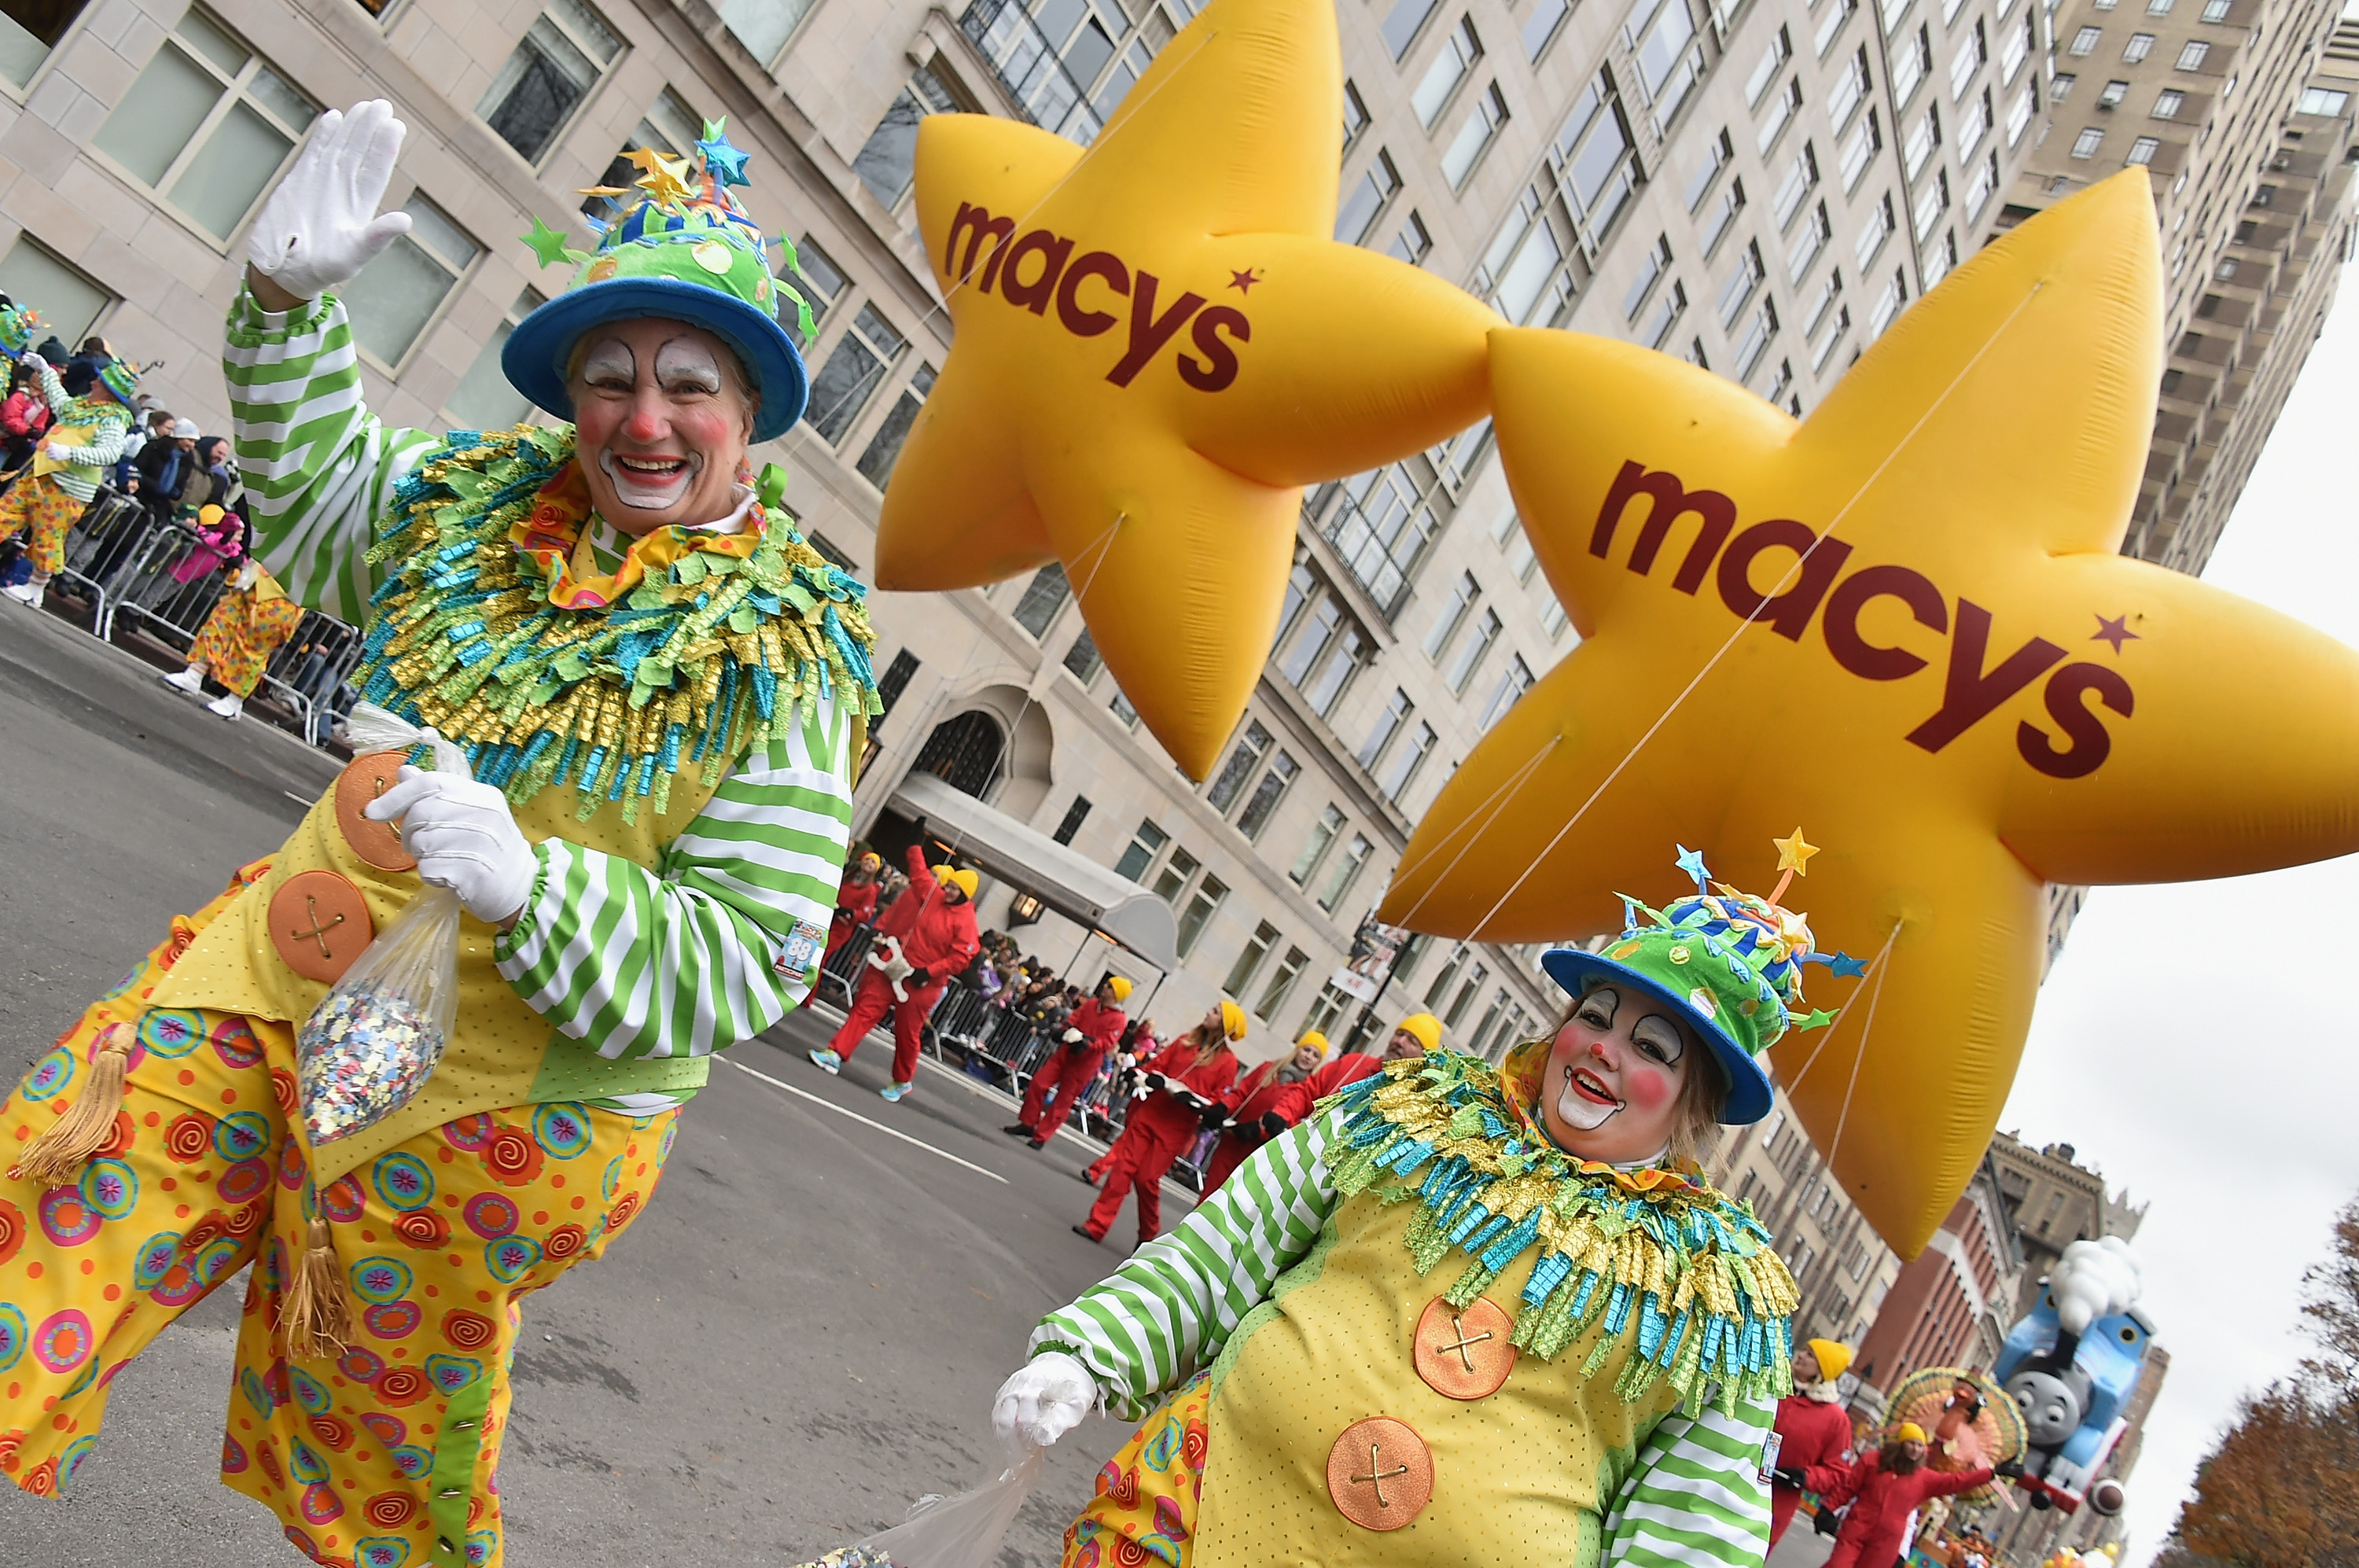 Macy’s Thanksgiving Day Parade 2015 Live Stream Watch Online | Heavy.com - Streaming Thanksgiving Day Parade Online